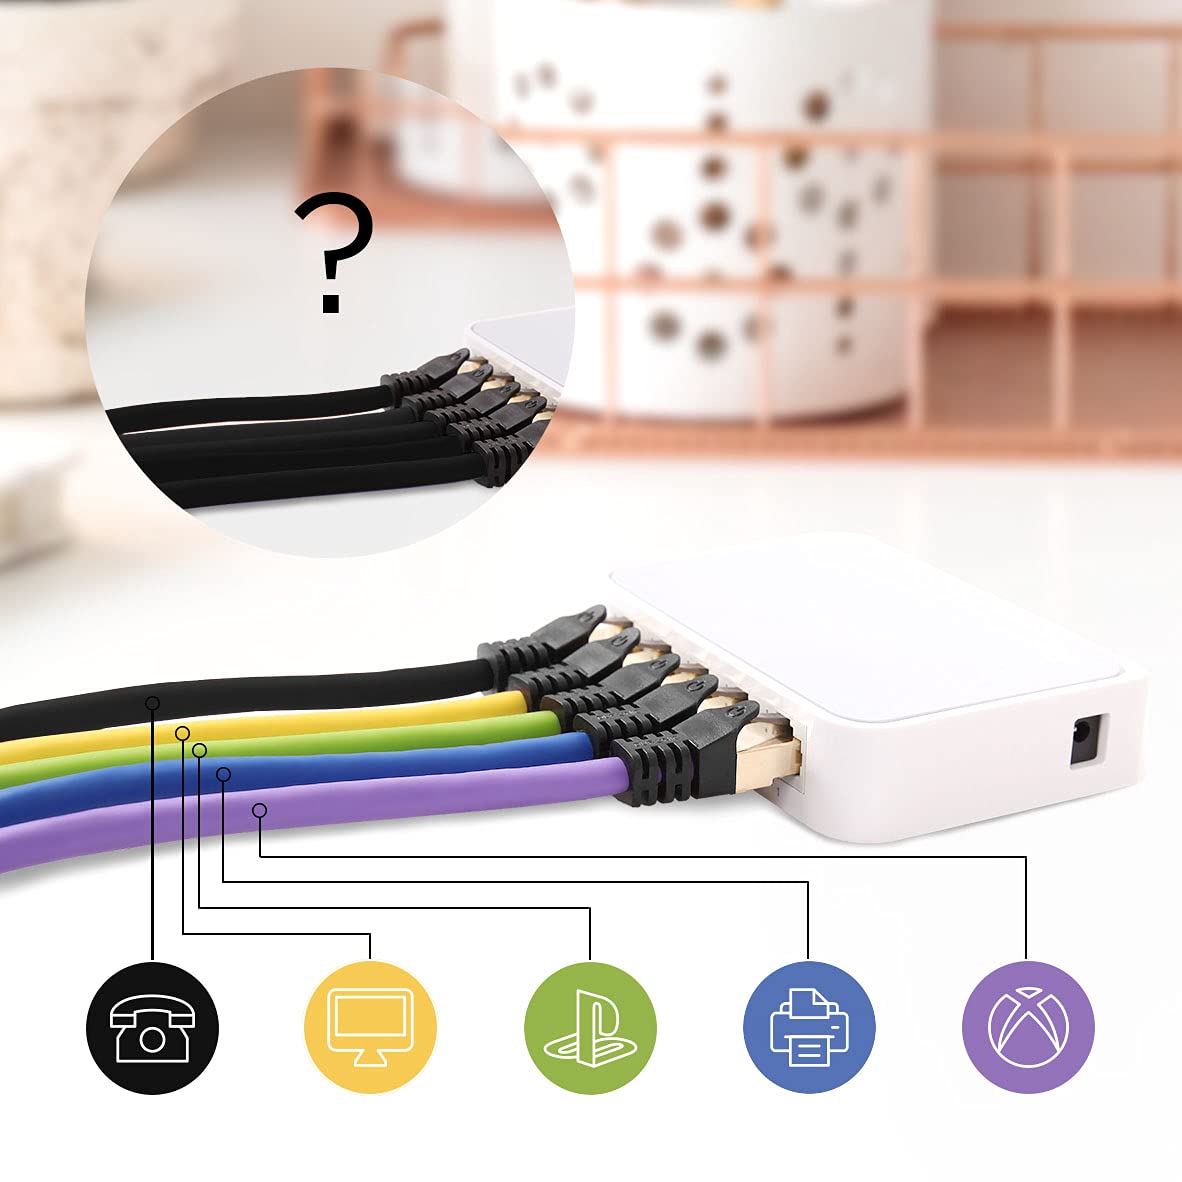 Duronic Ethernet Cable 3M High Speed CAT 8 Patch Network Shielded Lead 2GHz / 2000MHz / 40 Gigabit, CAT8 SFTP Wire, Snagless RJ45 Super-Fast Data - Black